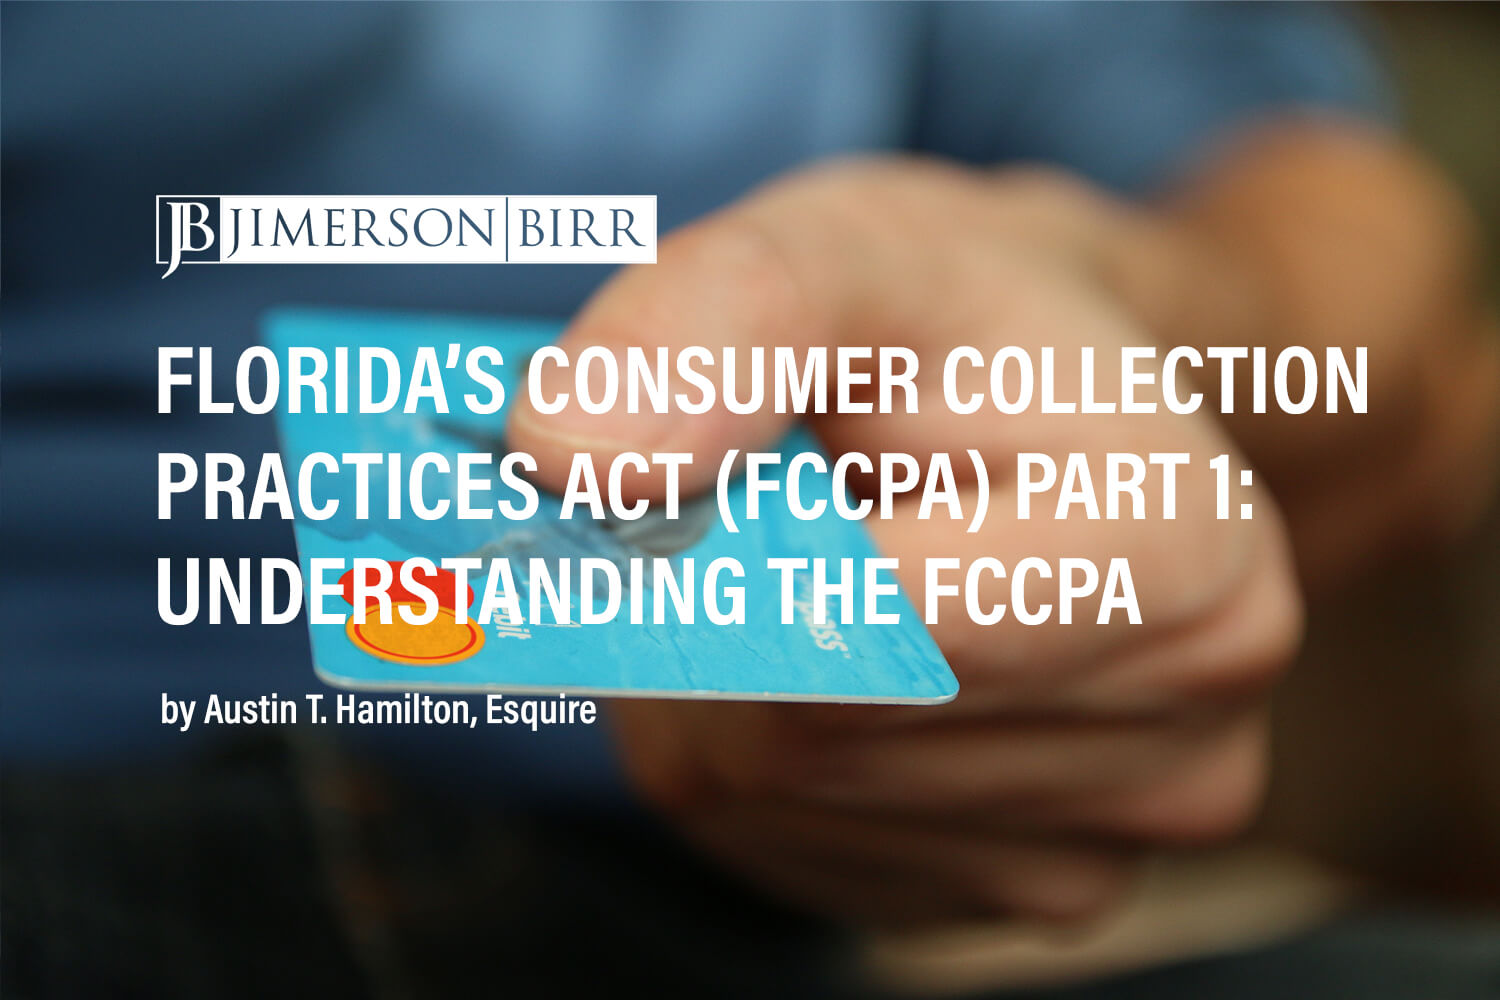 Florida’s Consumer Collection Practices Act (FCCPA) Part 1:  Understanding the FCCPA